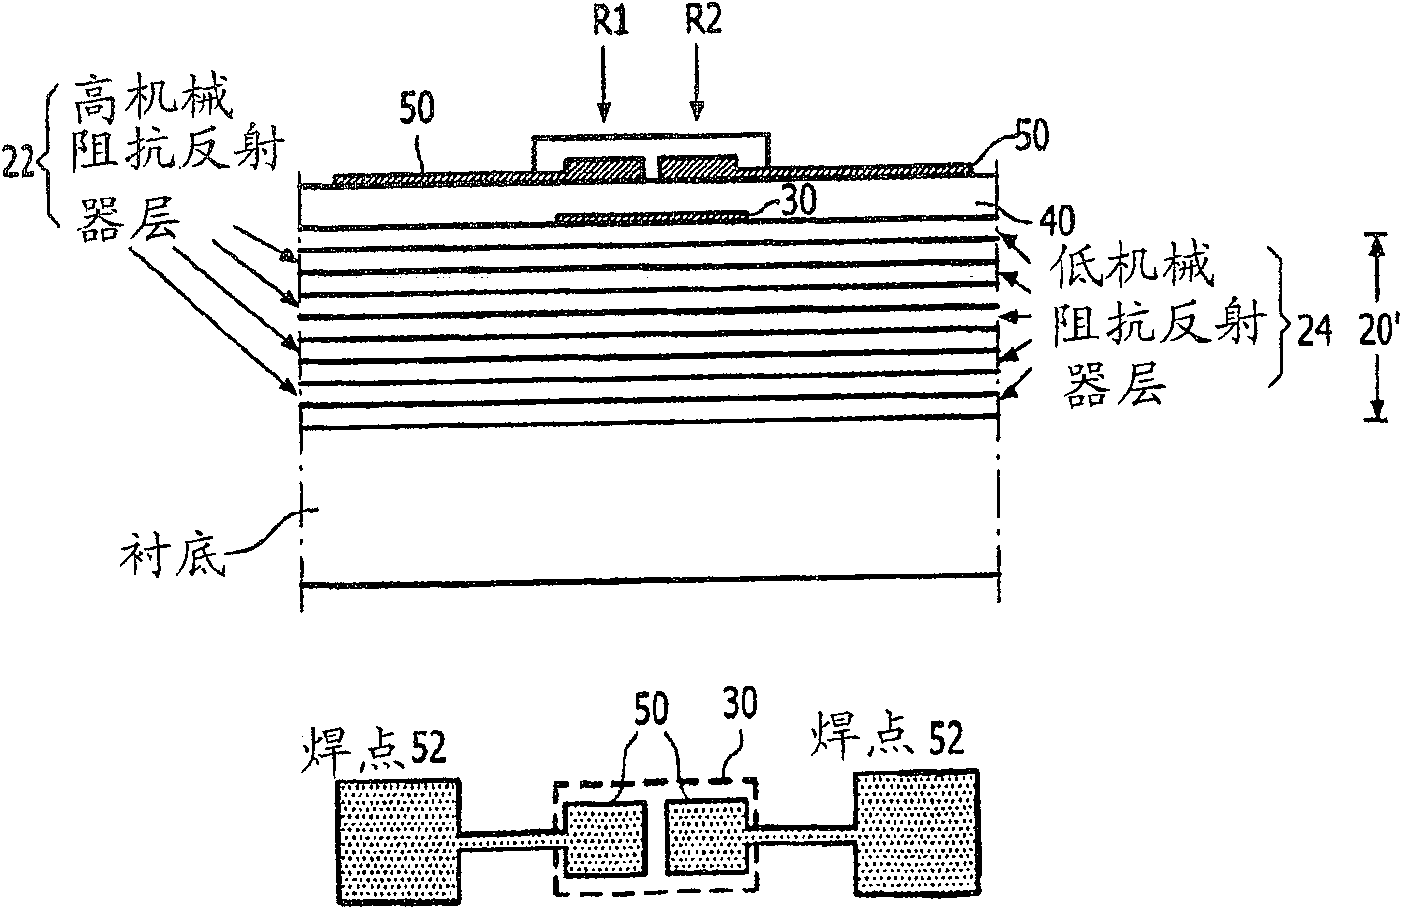 Resonator structure and method of producing it